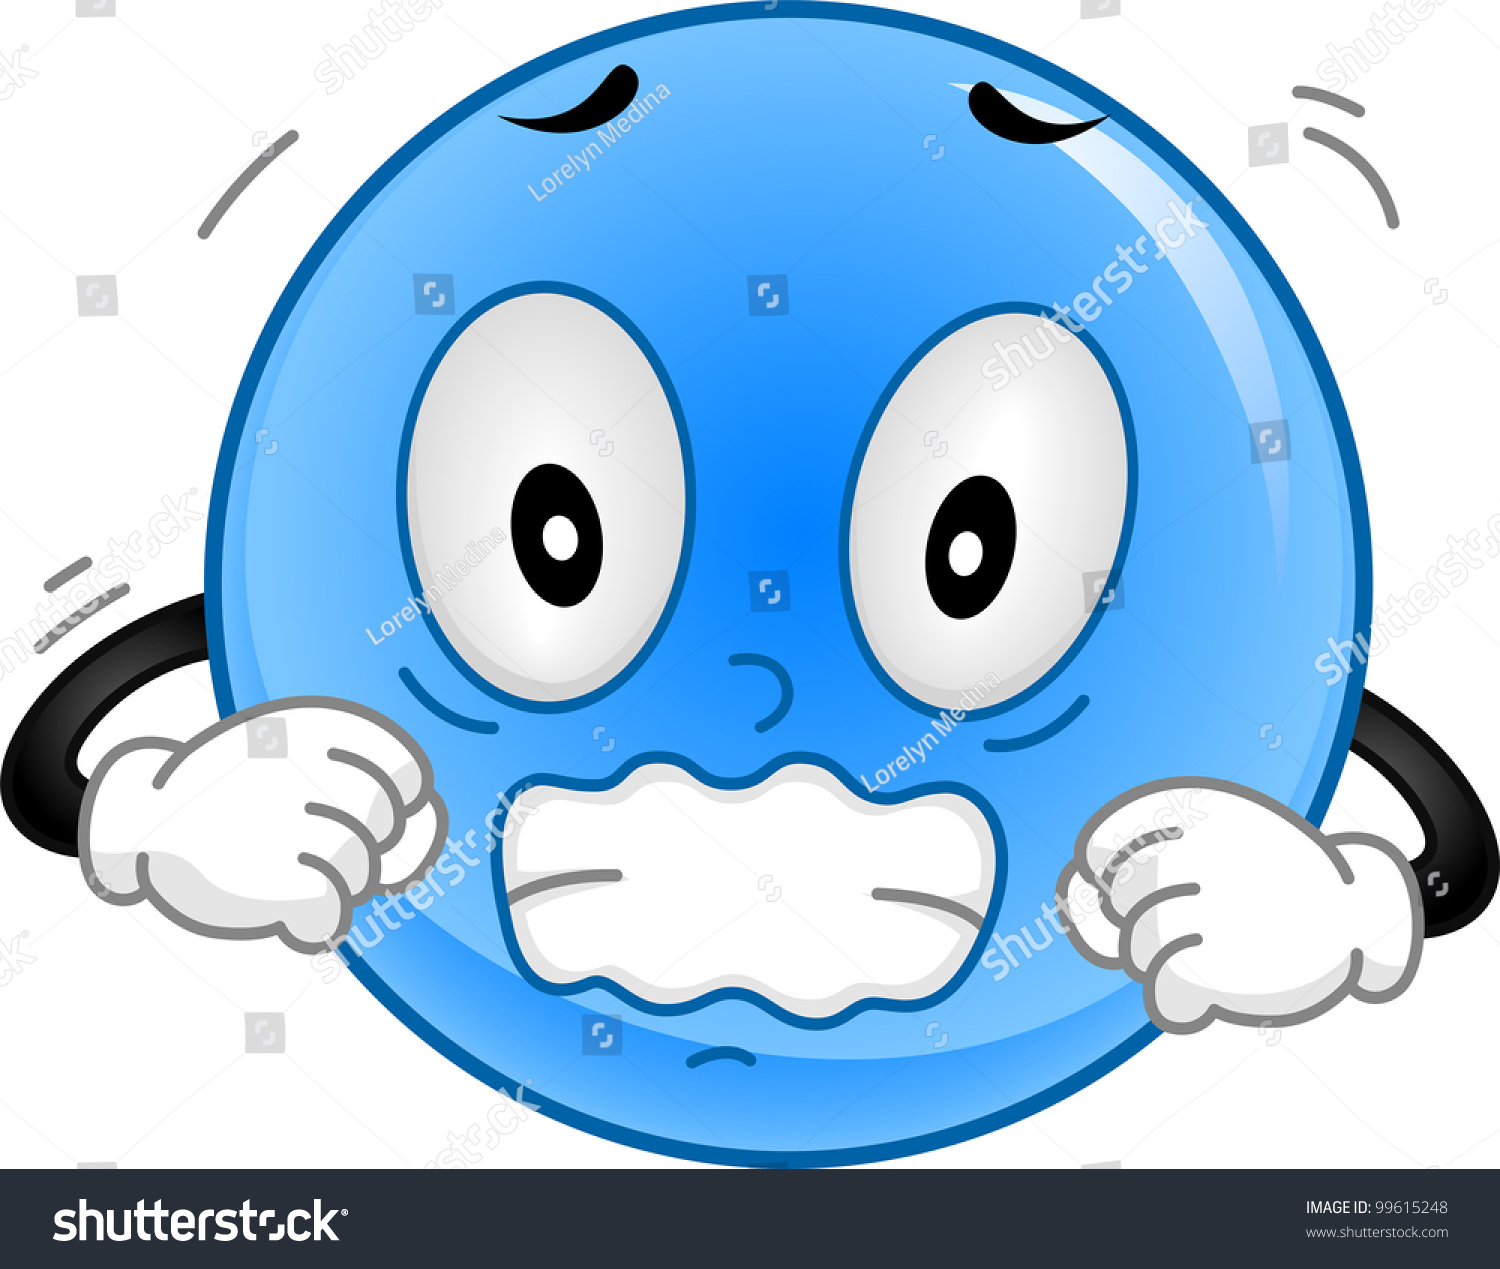 Illustration Shivering Smiley Stock Vector (Royalty Free) 99615248 Shutters...